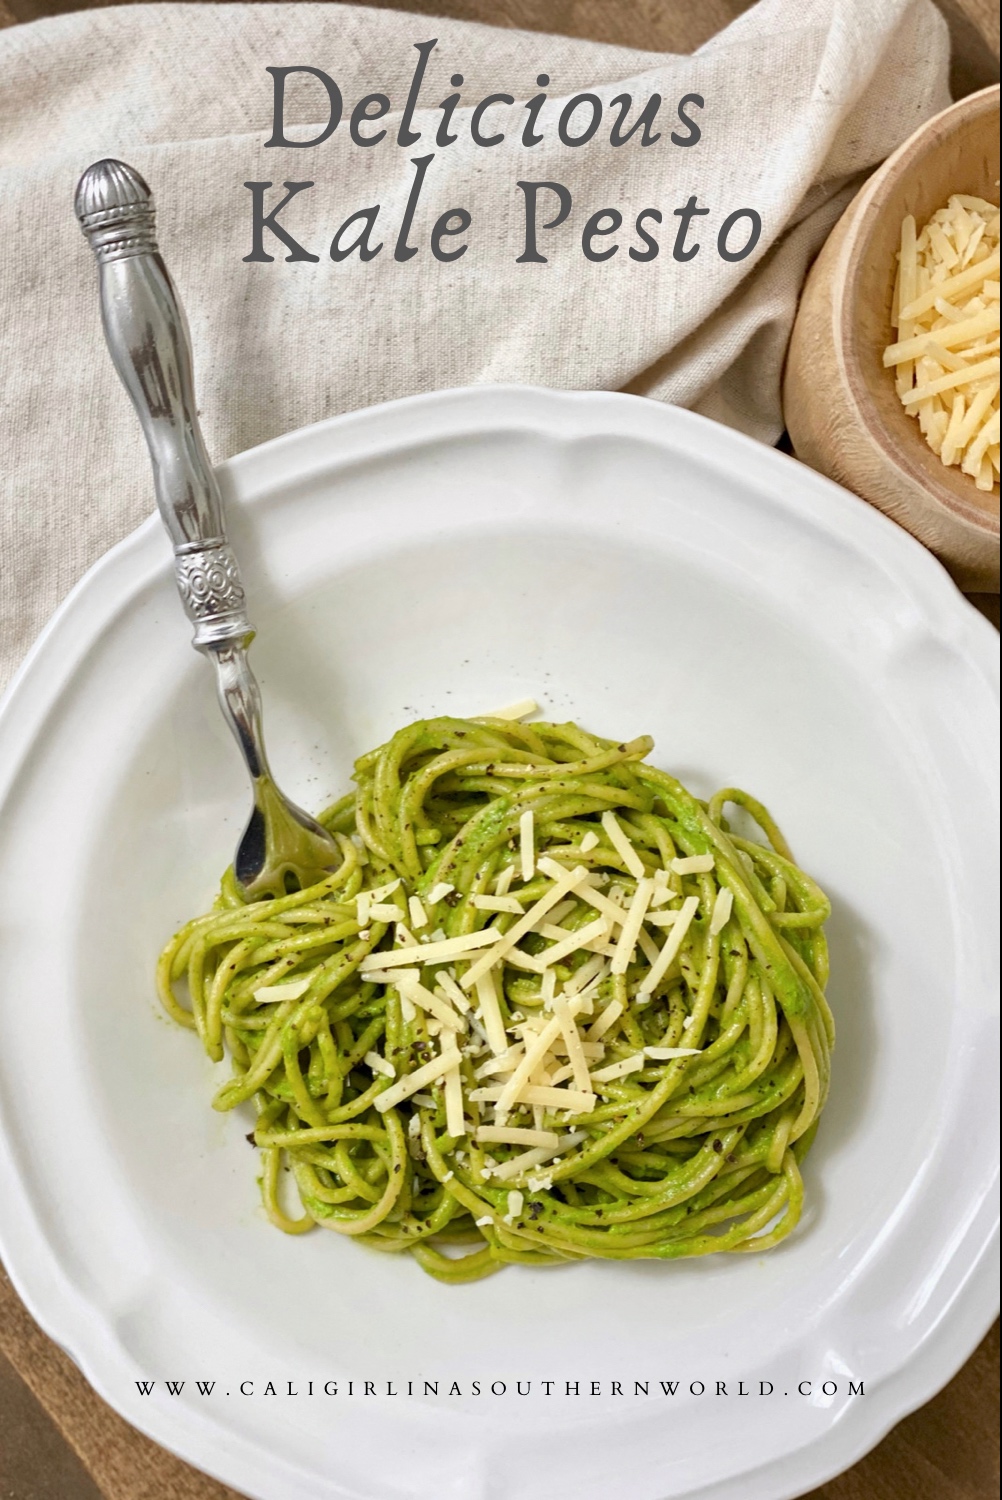 Pinterest image. Delicious kale pesto on whole wheat spaghetti pasta with parmesan cheese and fresh cracked pepper on top served in a white pasta bowl.